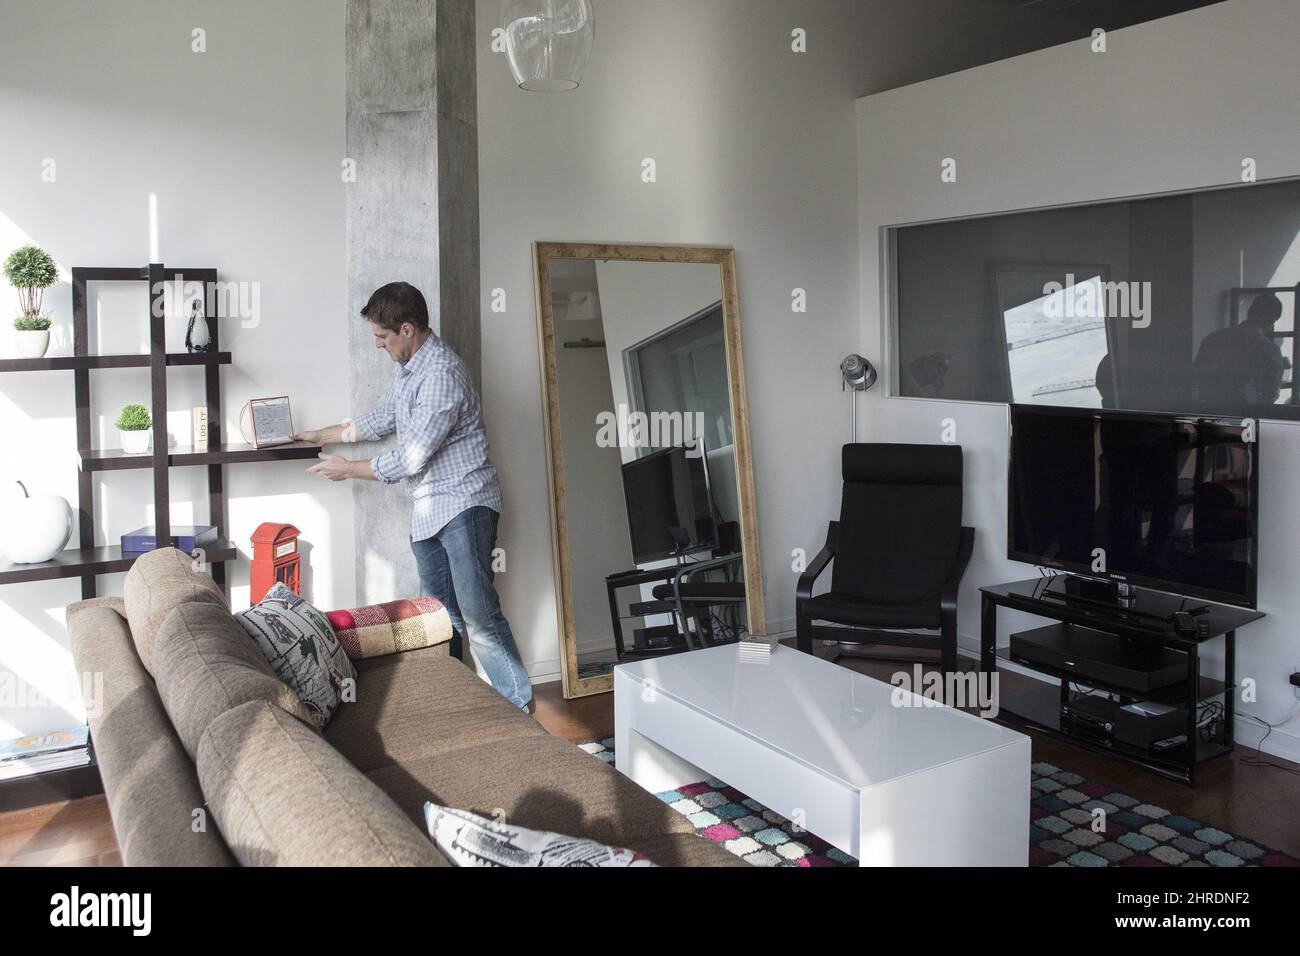 Kevin Makra is pictured preparing for guests in his Toronto Airbnb rental apartment, on Saturday, December 2, 2017. Politicians in Toronto will be scrutinizing proposed rules for short-term rentals this week that could spell major changes for those who offer secondary residences for rent on platforms like Airbnb. THE CANADIAN PRESS/Chris Young Stock Photo